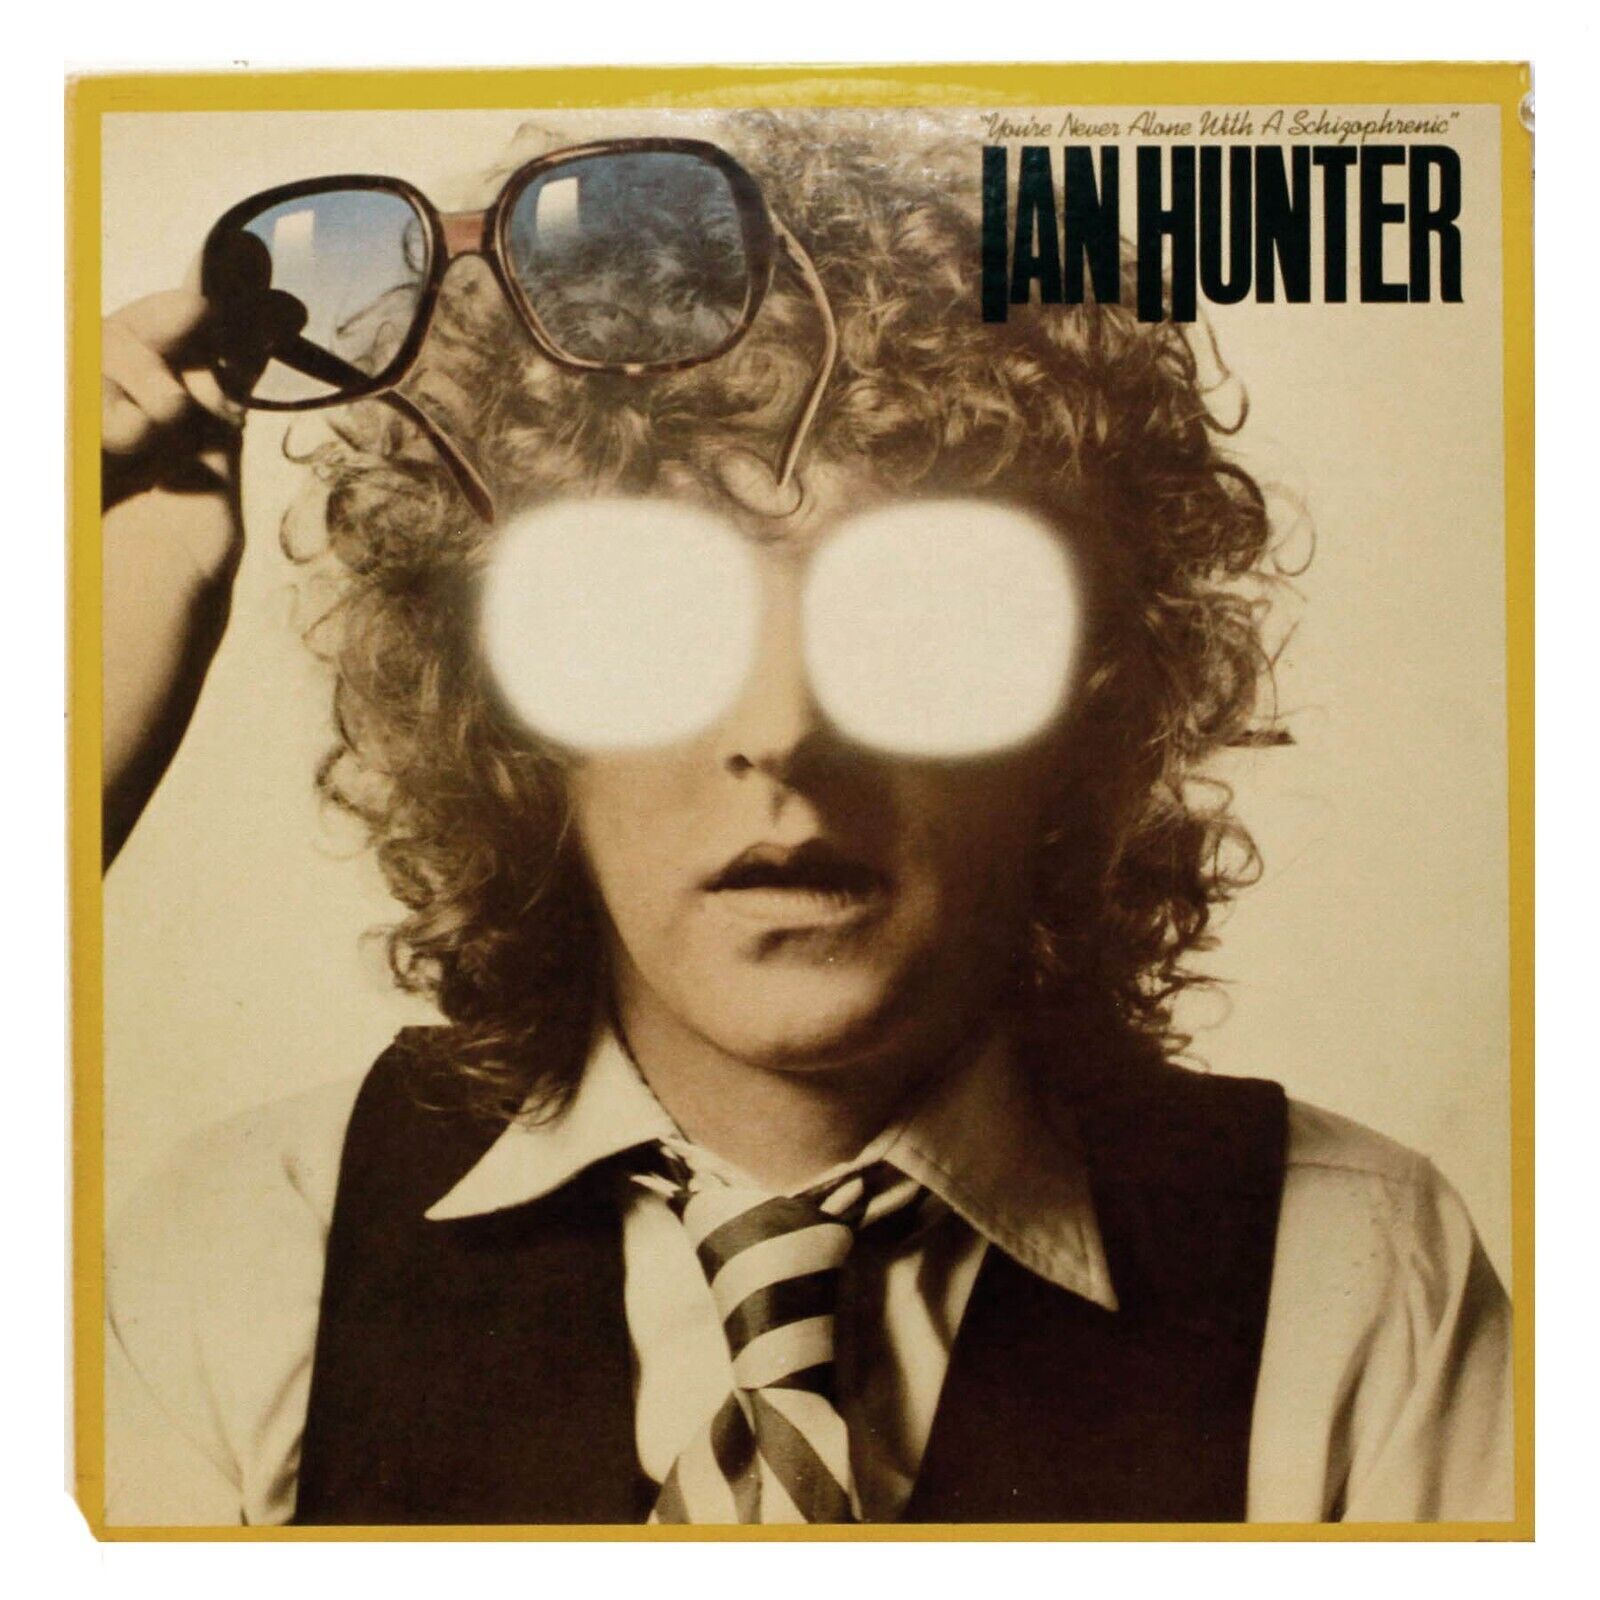 IAN HUNTER  "YOU'RE NEVER ALONE WITH A SCHIZOPHRENIC"  1979  LP